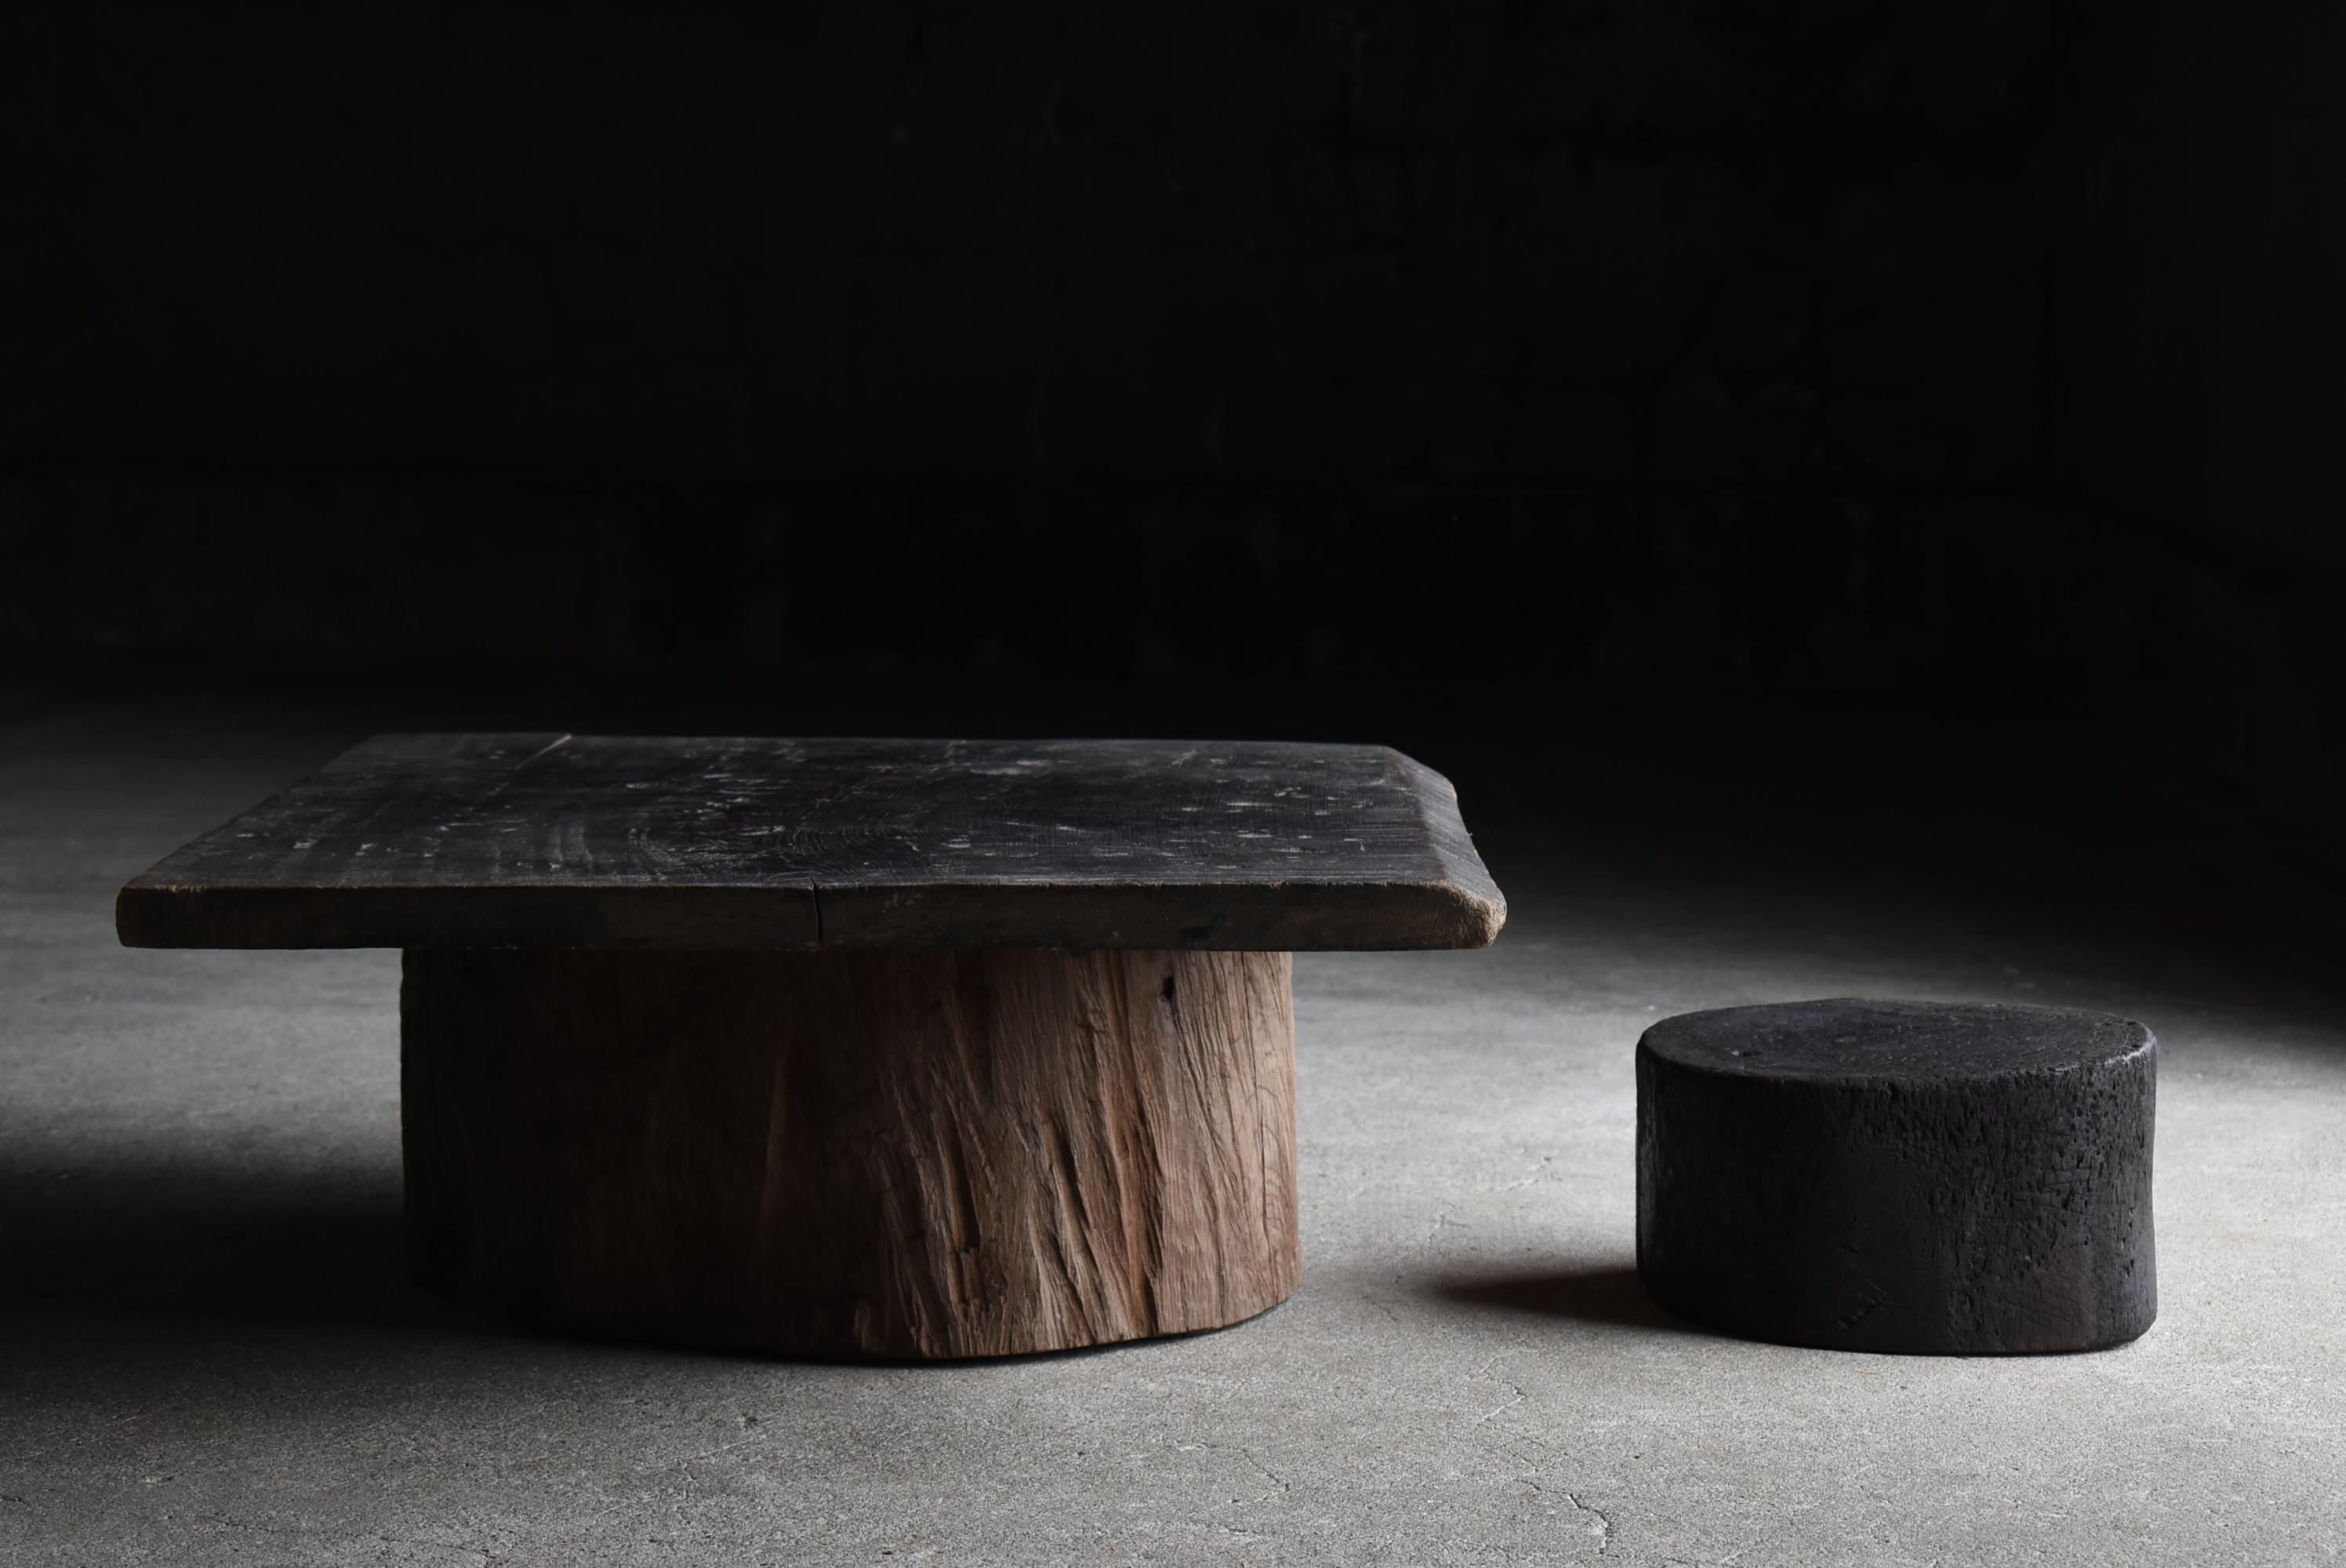 Very old Japanese wooden block stool.
It was made during the Meiji period (1860s-1900s).
The material is zelkova.

It is sturdy and stable.
The seat is slanted and easy to sit on.

The grain of the zelkova wood is beautiful.
Rustic and